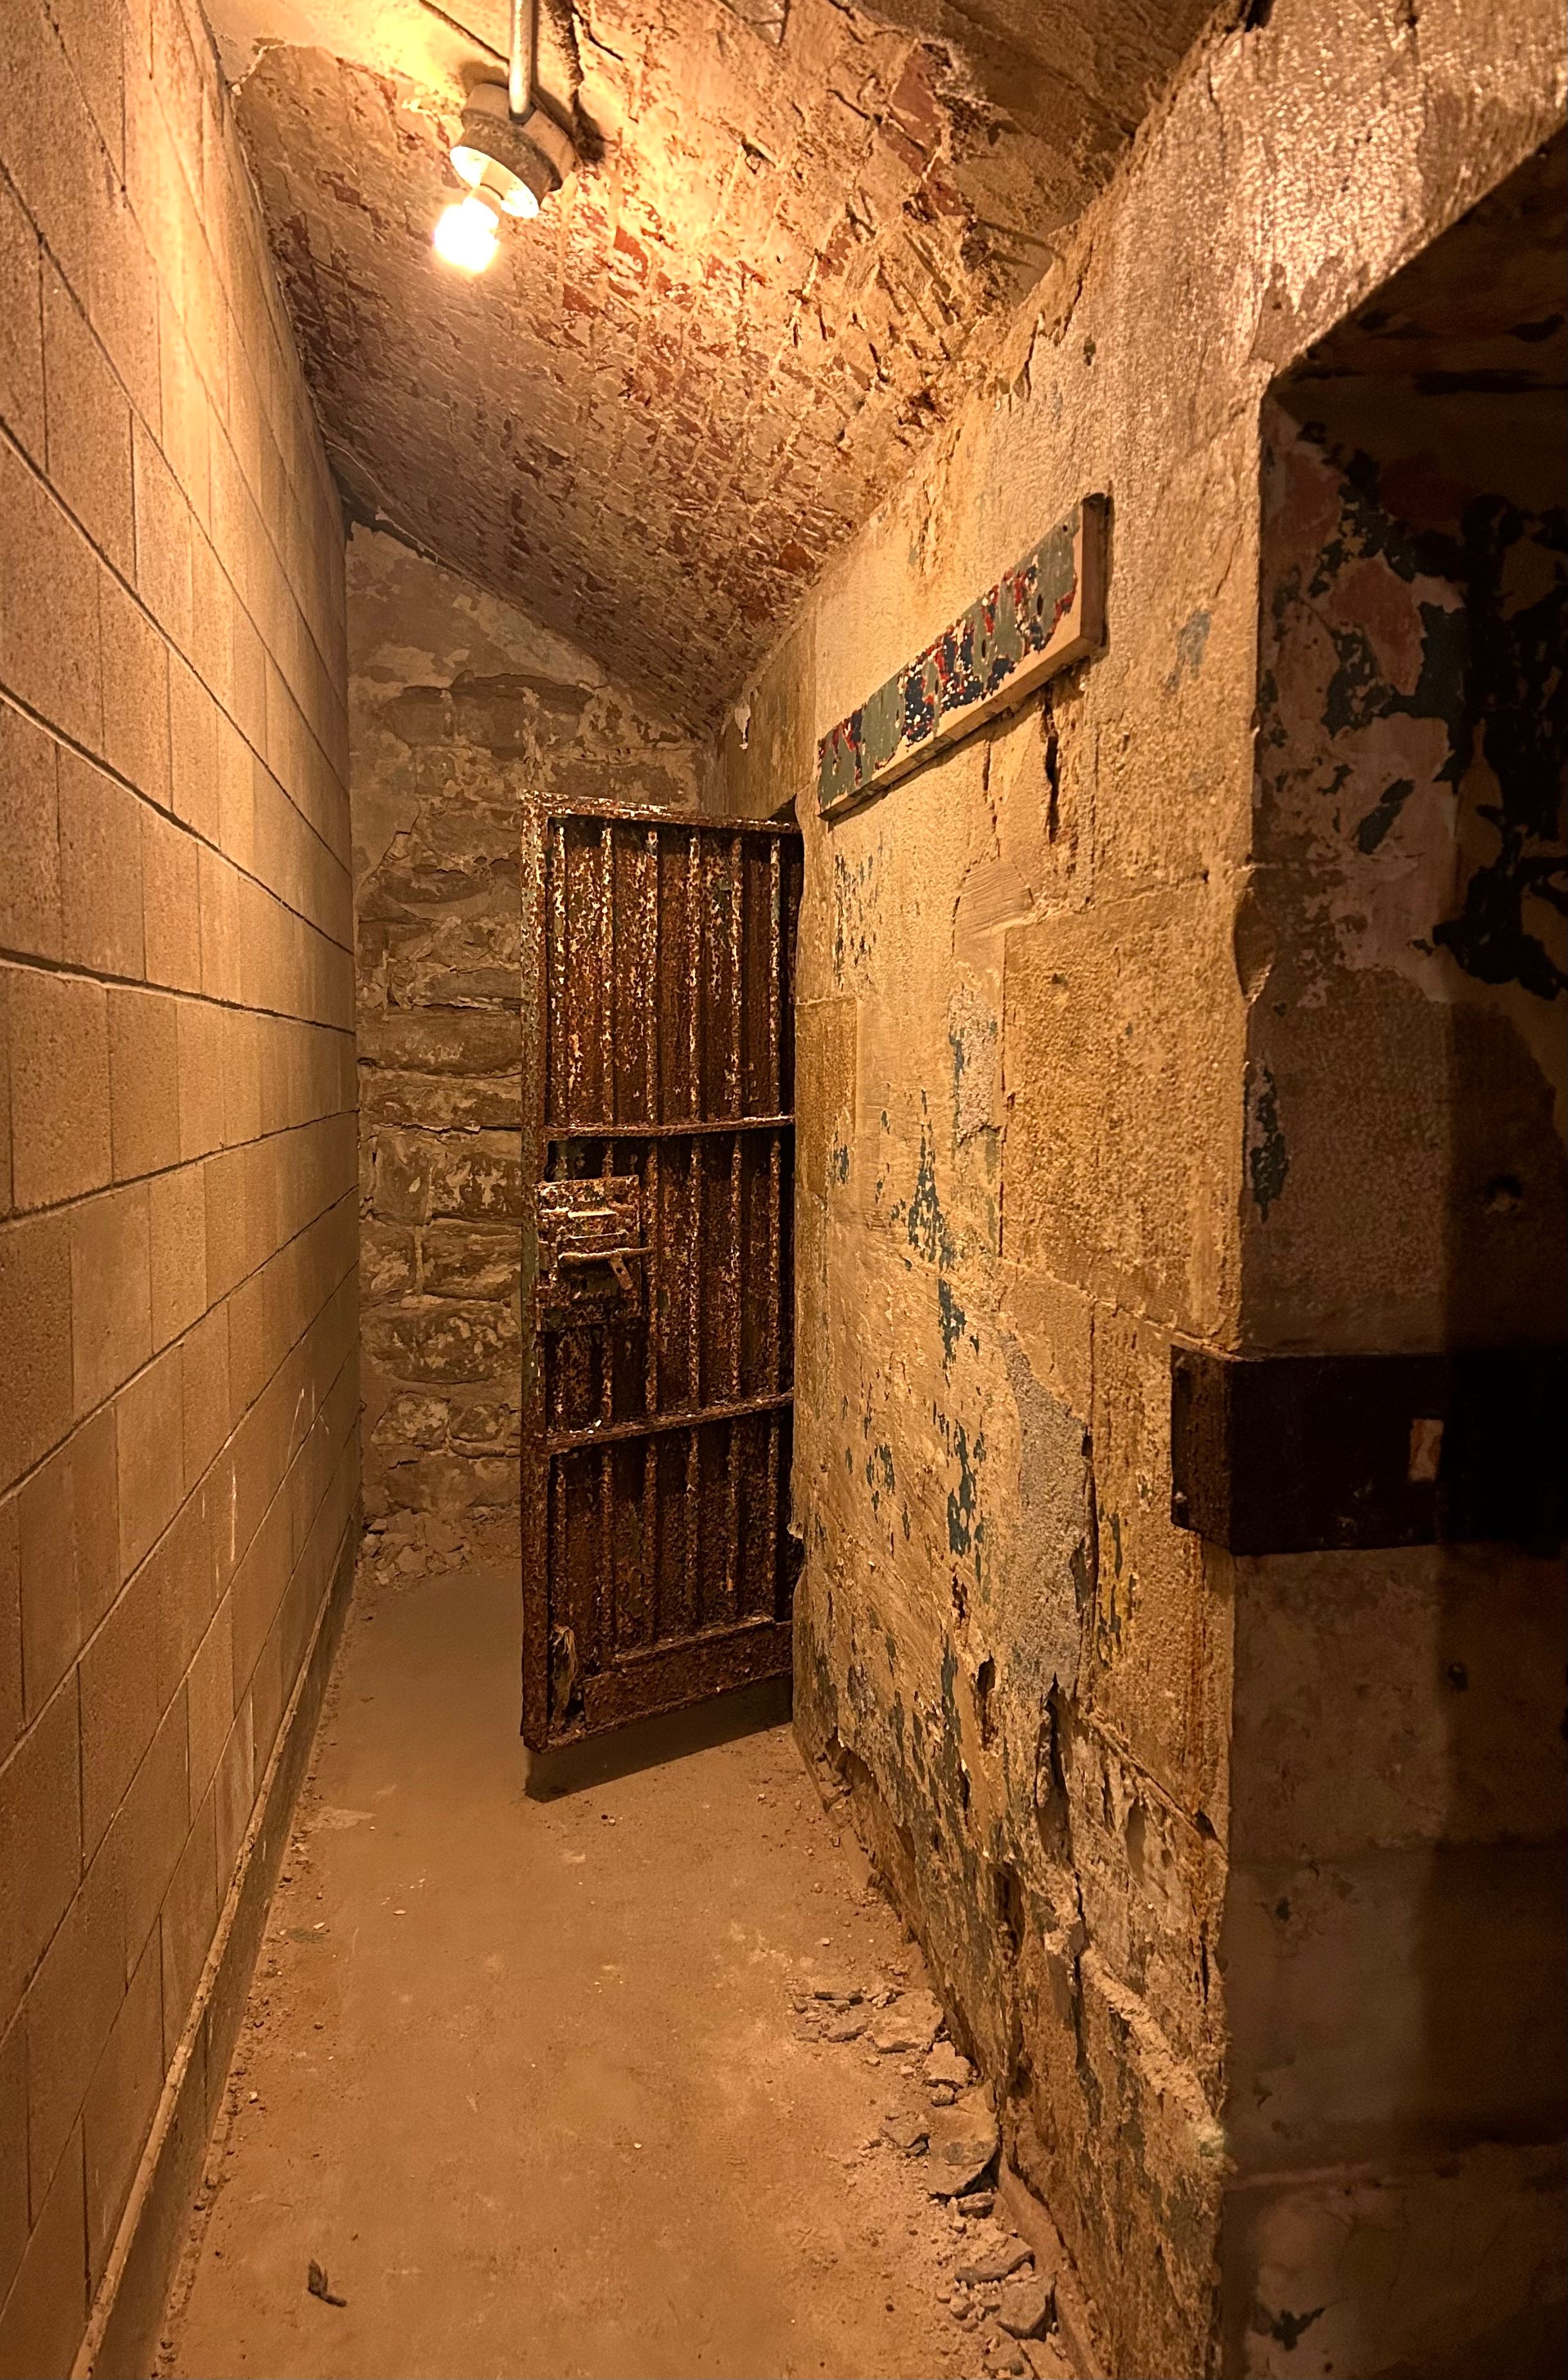 J. B. "Firebug" Johnson served 18 years in this underground “dungeon” and later wrote a book about his experience.